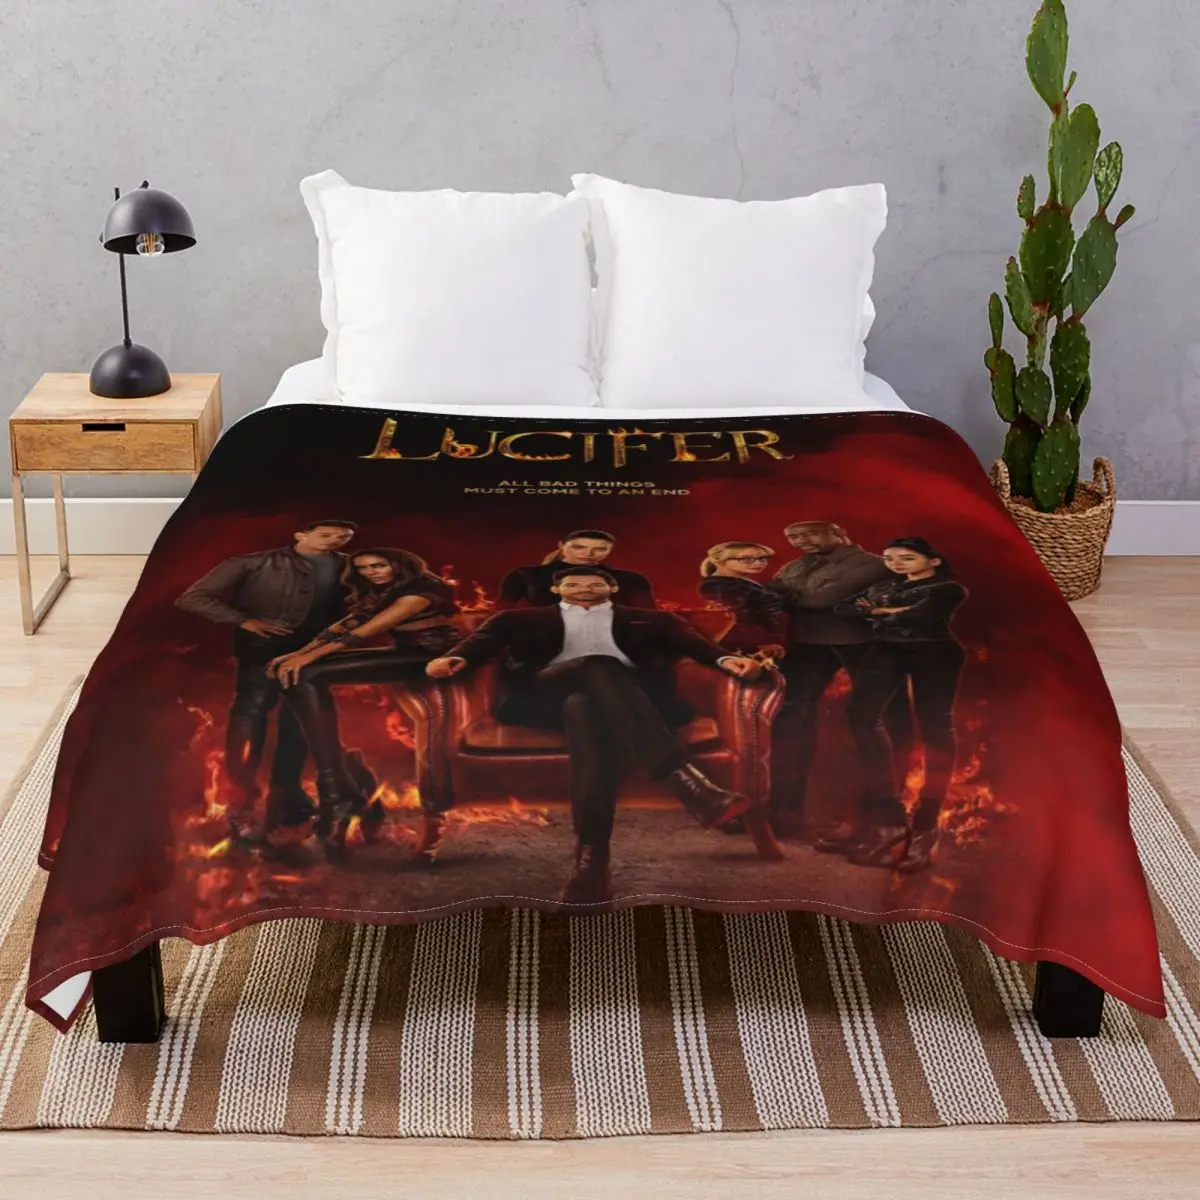 Lucifer Mornin Final Blanket Flannel Print Lightweight Unisex Throw Blankets for Bedding Home Couch Camp Office